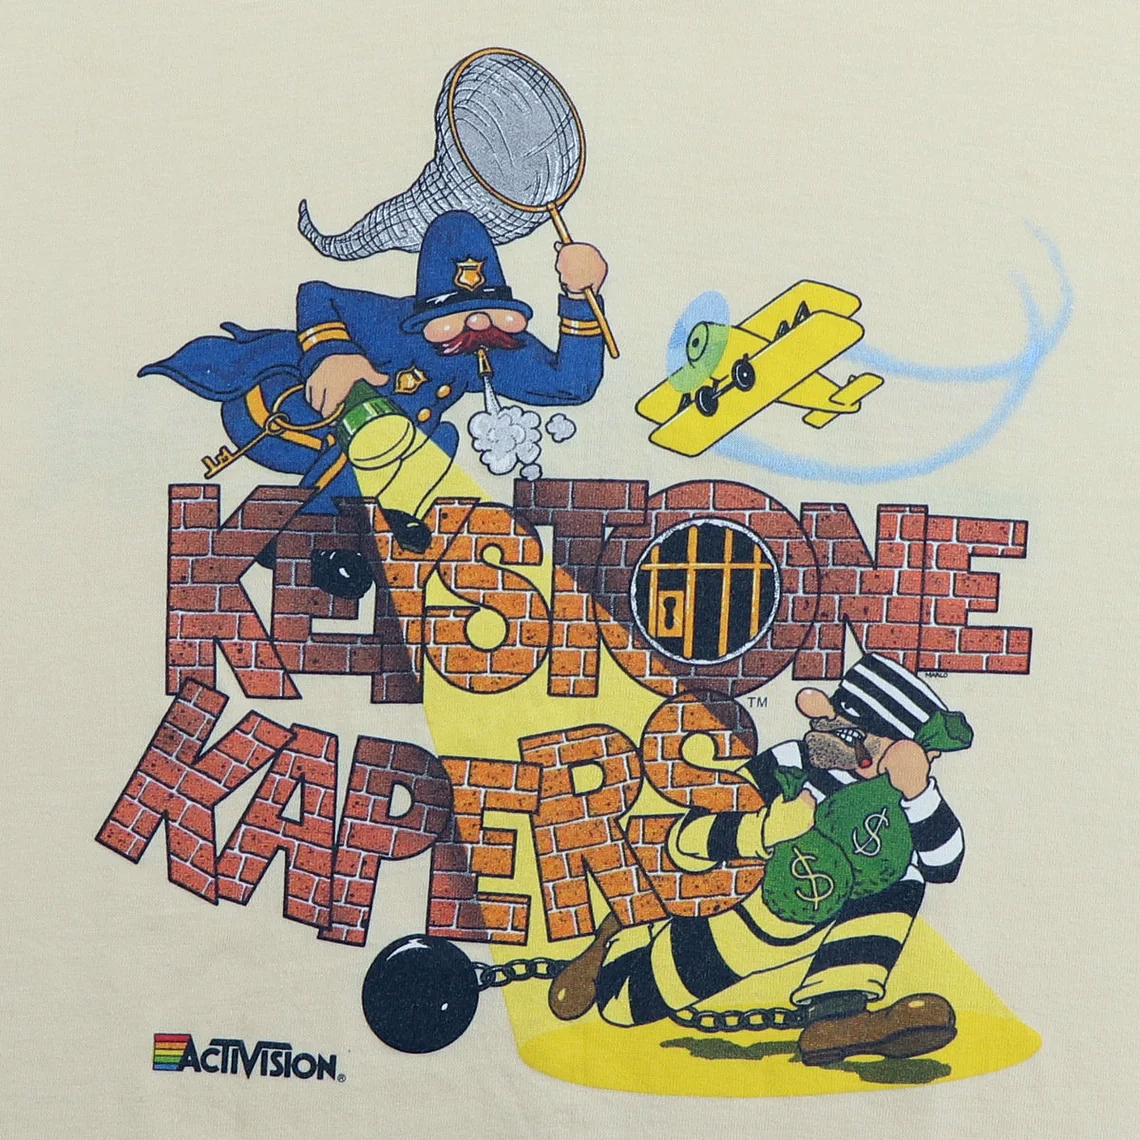 Keystone Kapers by Activision - ColecoVision Addict.com